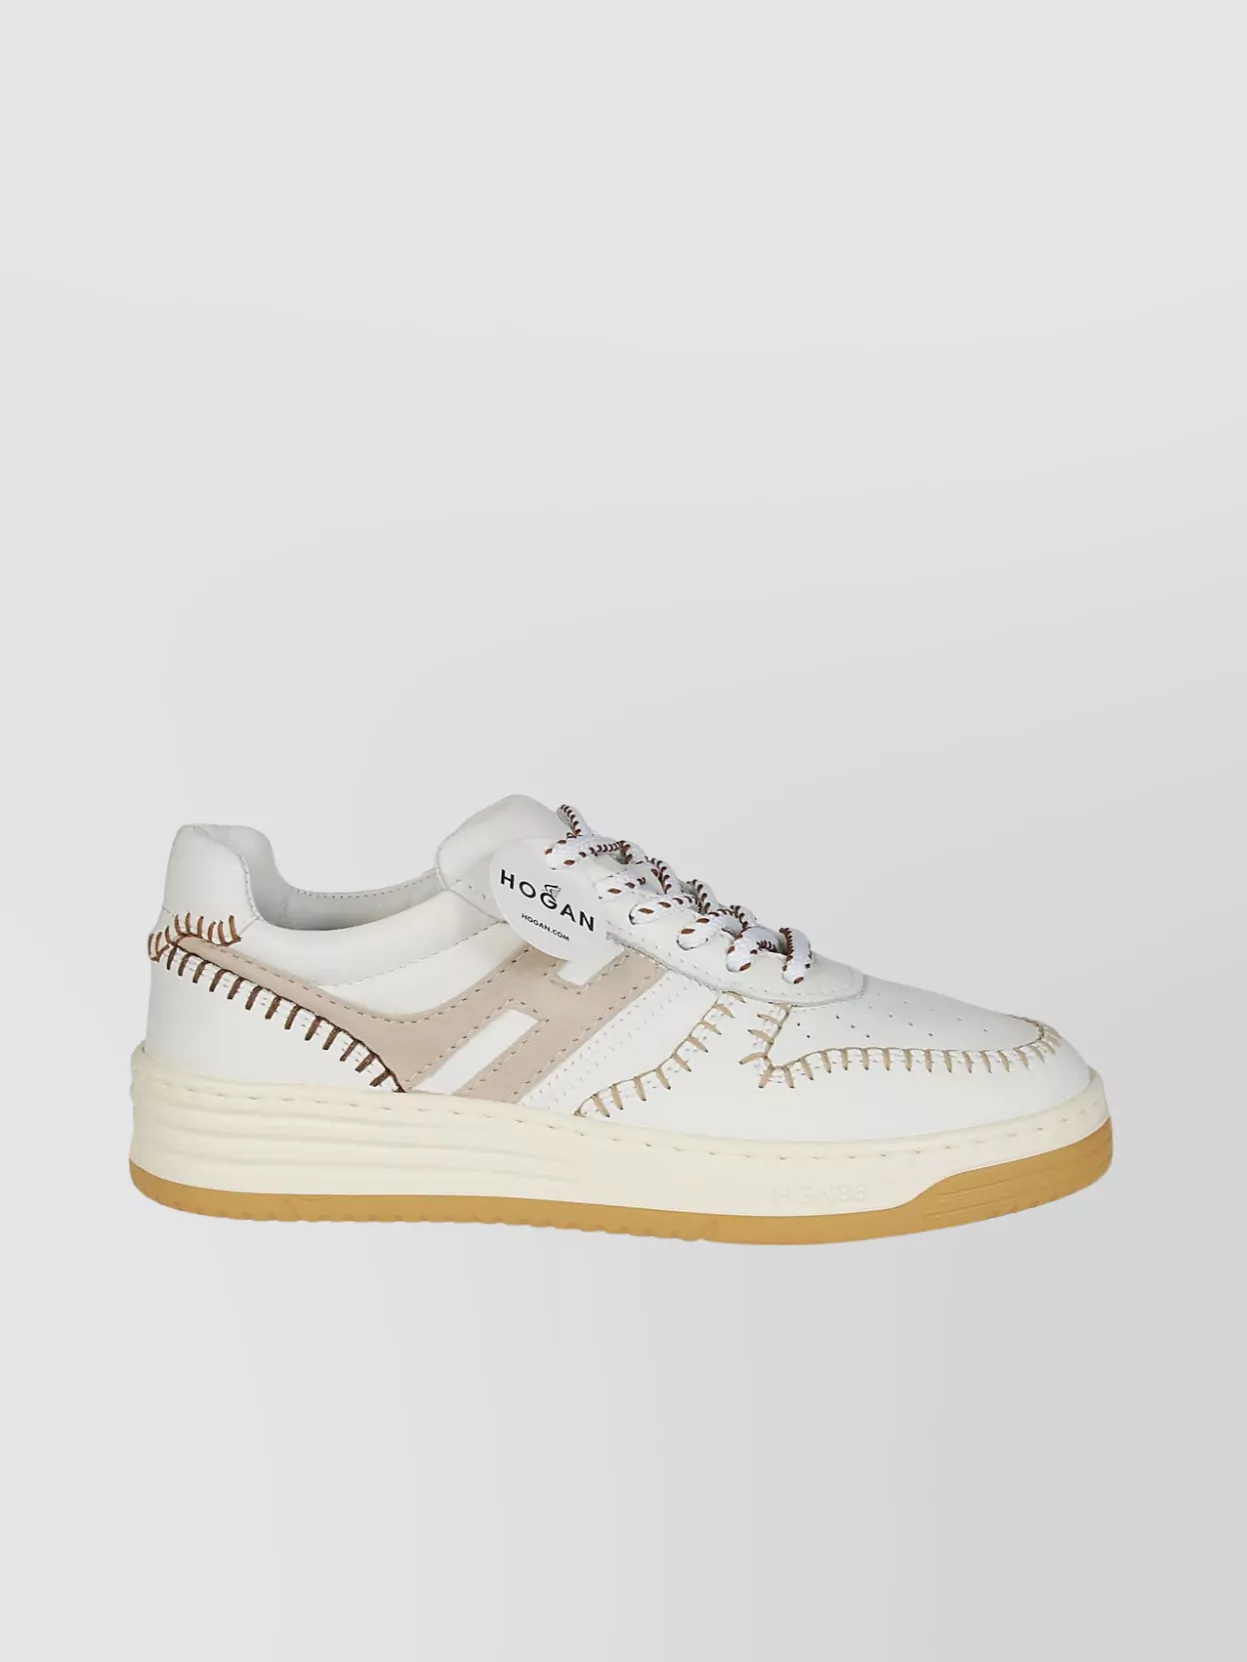 Shop Hogan Stitched Perforated Platform Sneakers